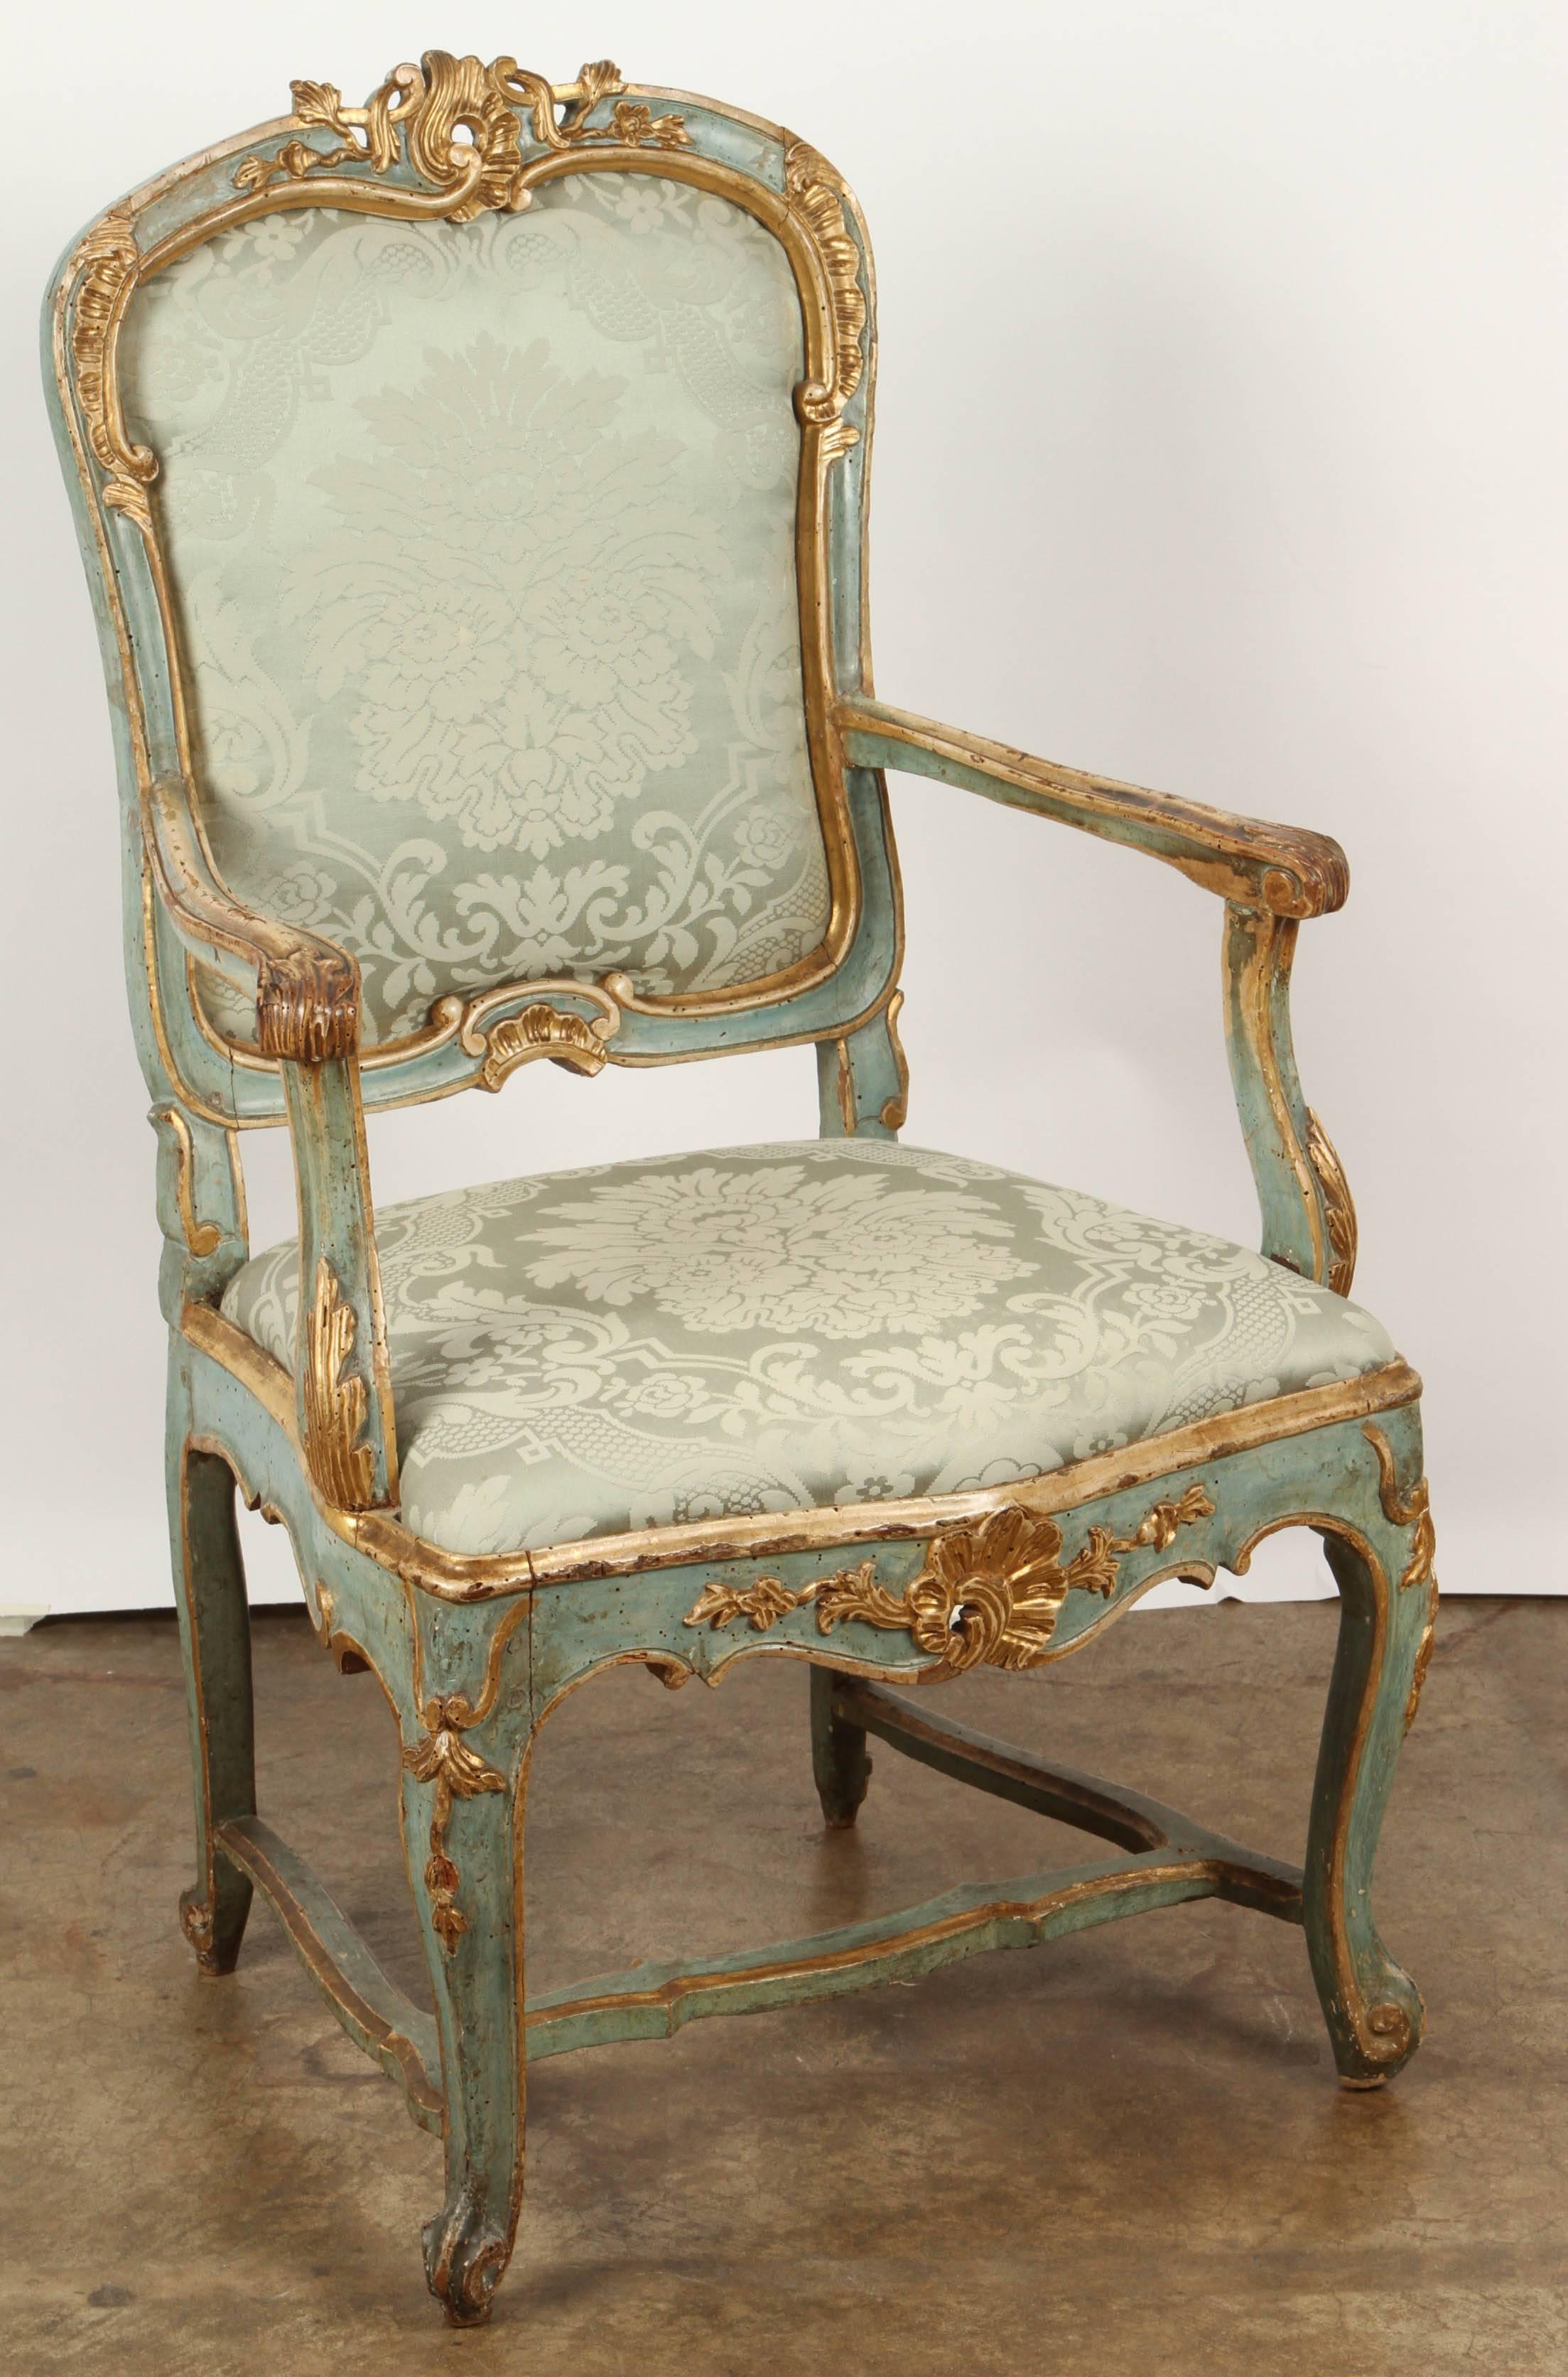 The chair, upholstered with matching silk damask to the seat and back rest, the slightly rounded crestrail decorated with a central rocaille and flower heads, the ears decorated with rocaille, the shaped arm rests ending in carved acanthus leaves.